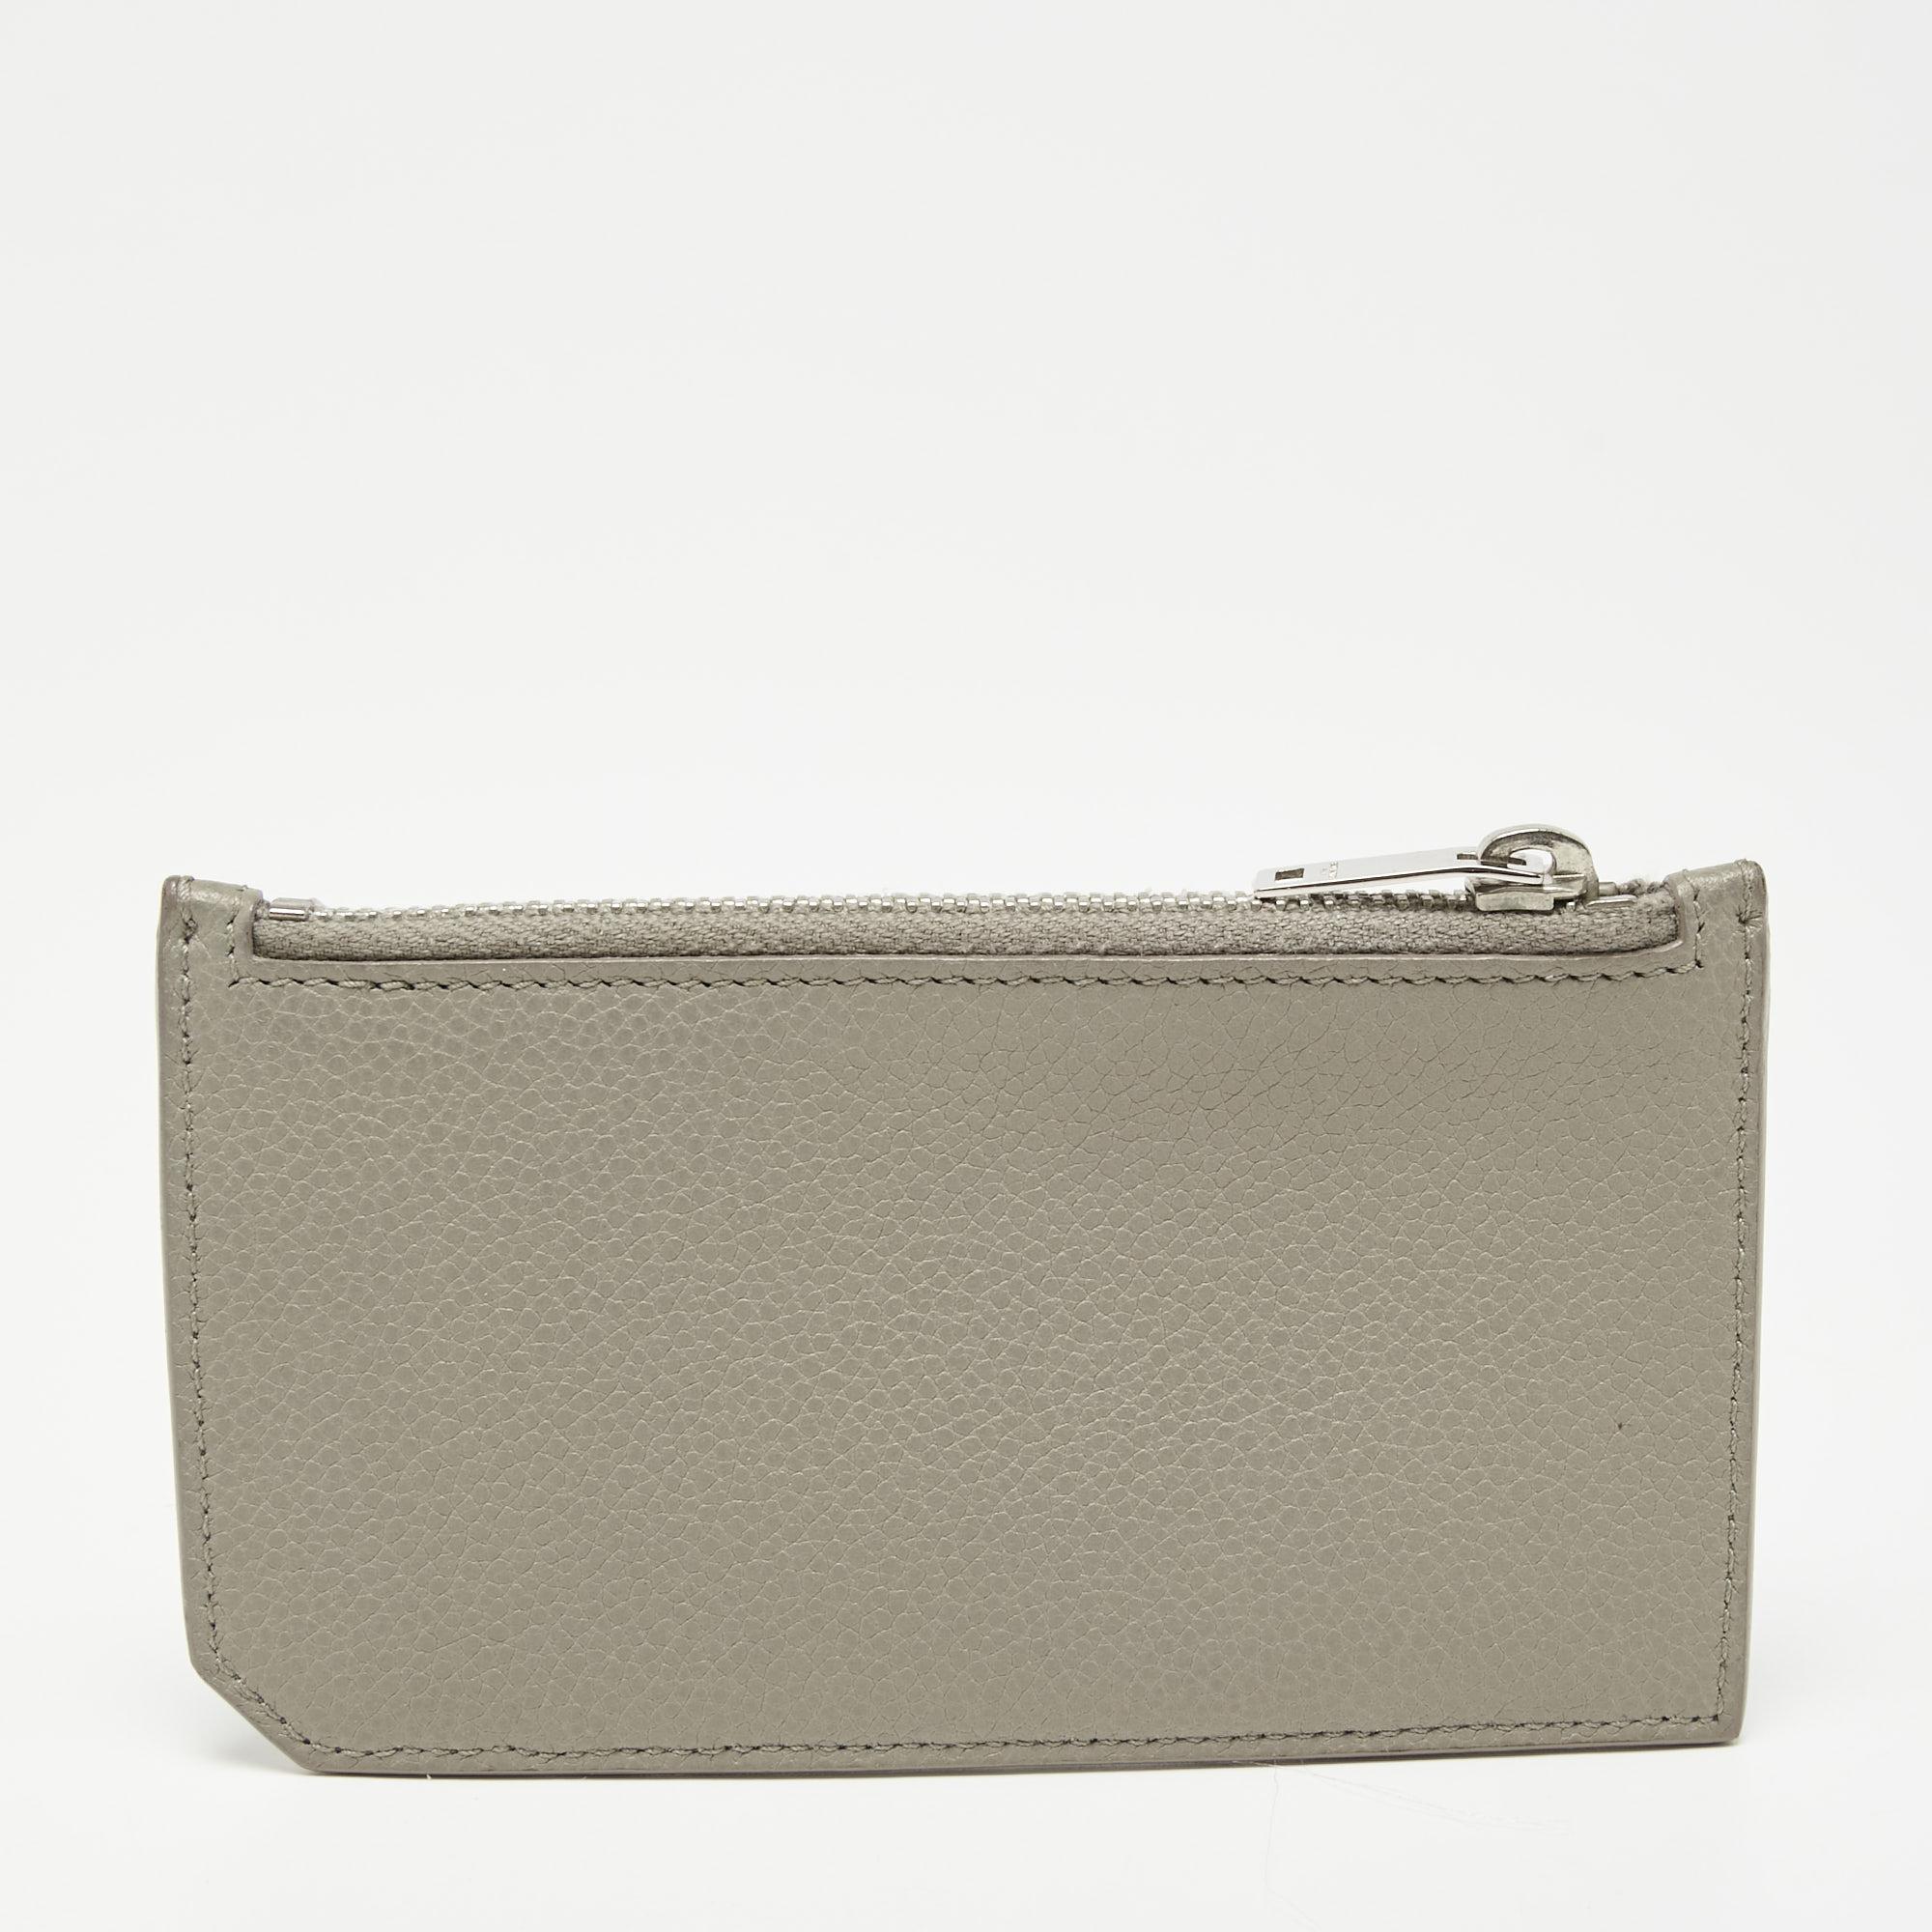 The grey exterior of this Saint Laurent card case is divided into different slots making it a practical choice. Created from leather, it flaunts a brand signature on the front, a lined interior, and a top zipper closure.

Includes: Original Dustbag